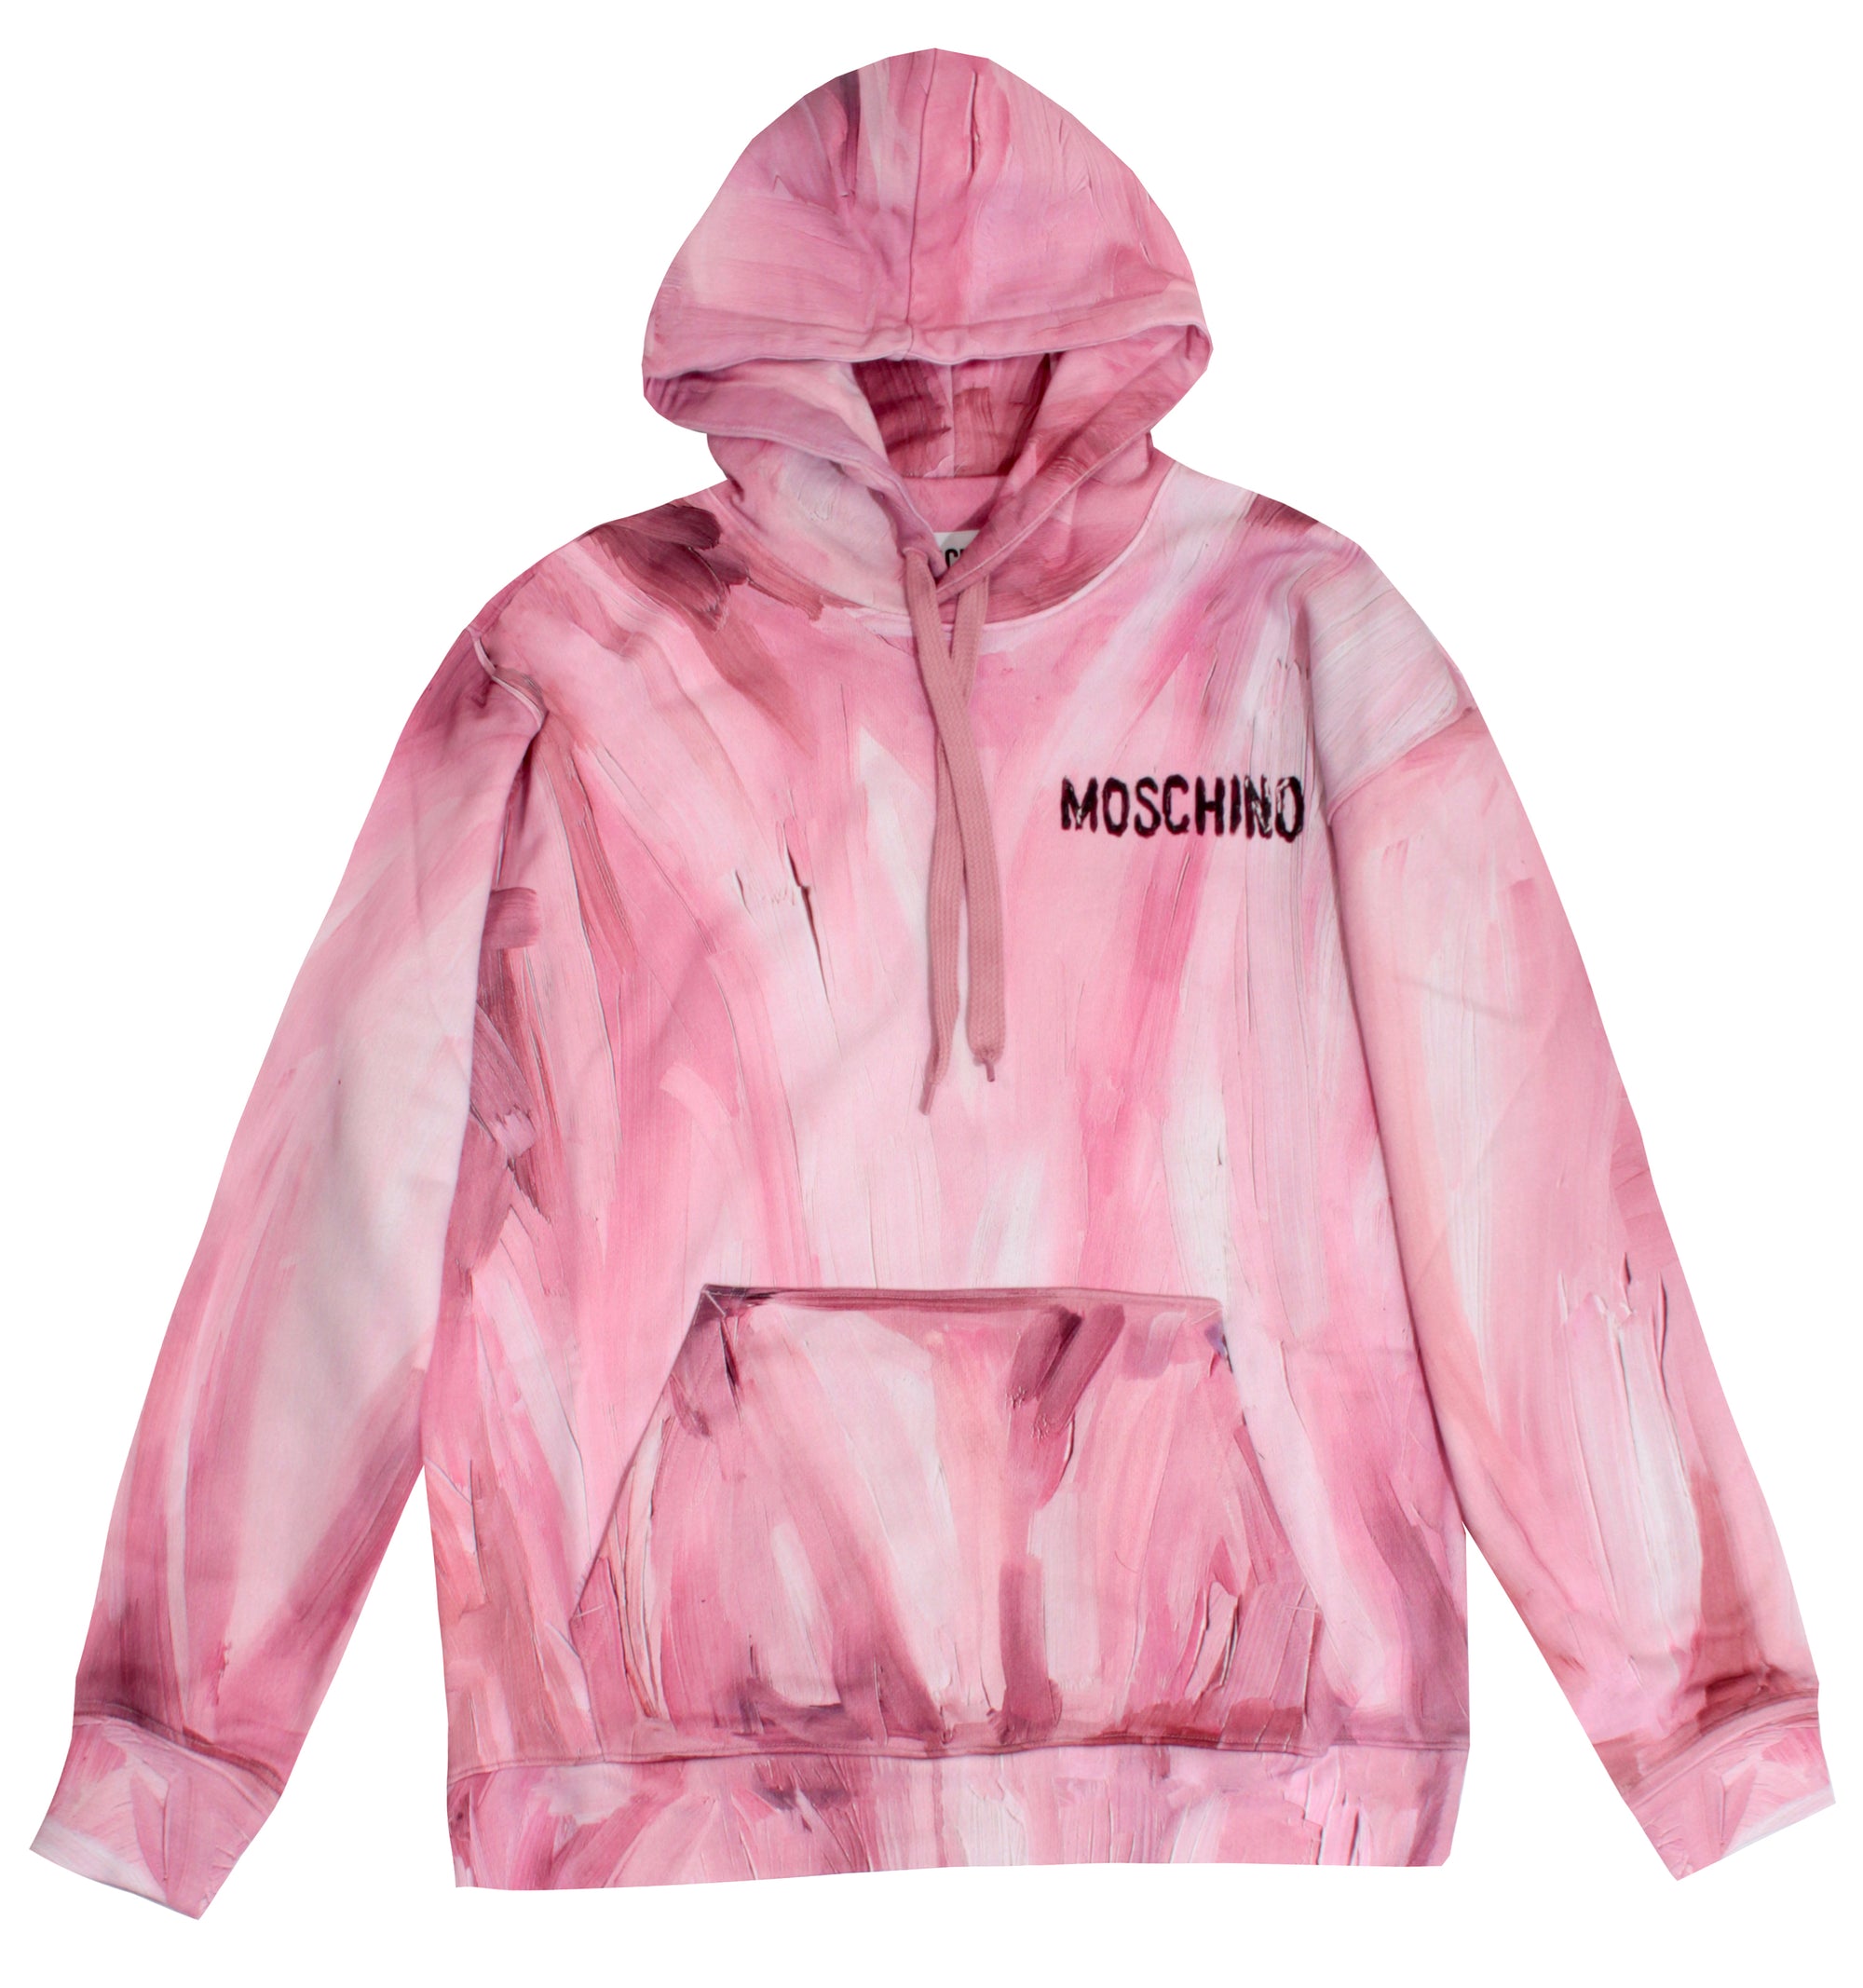 Moschino Marbled Pullover Hoodie - Pink